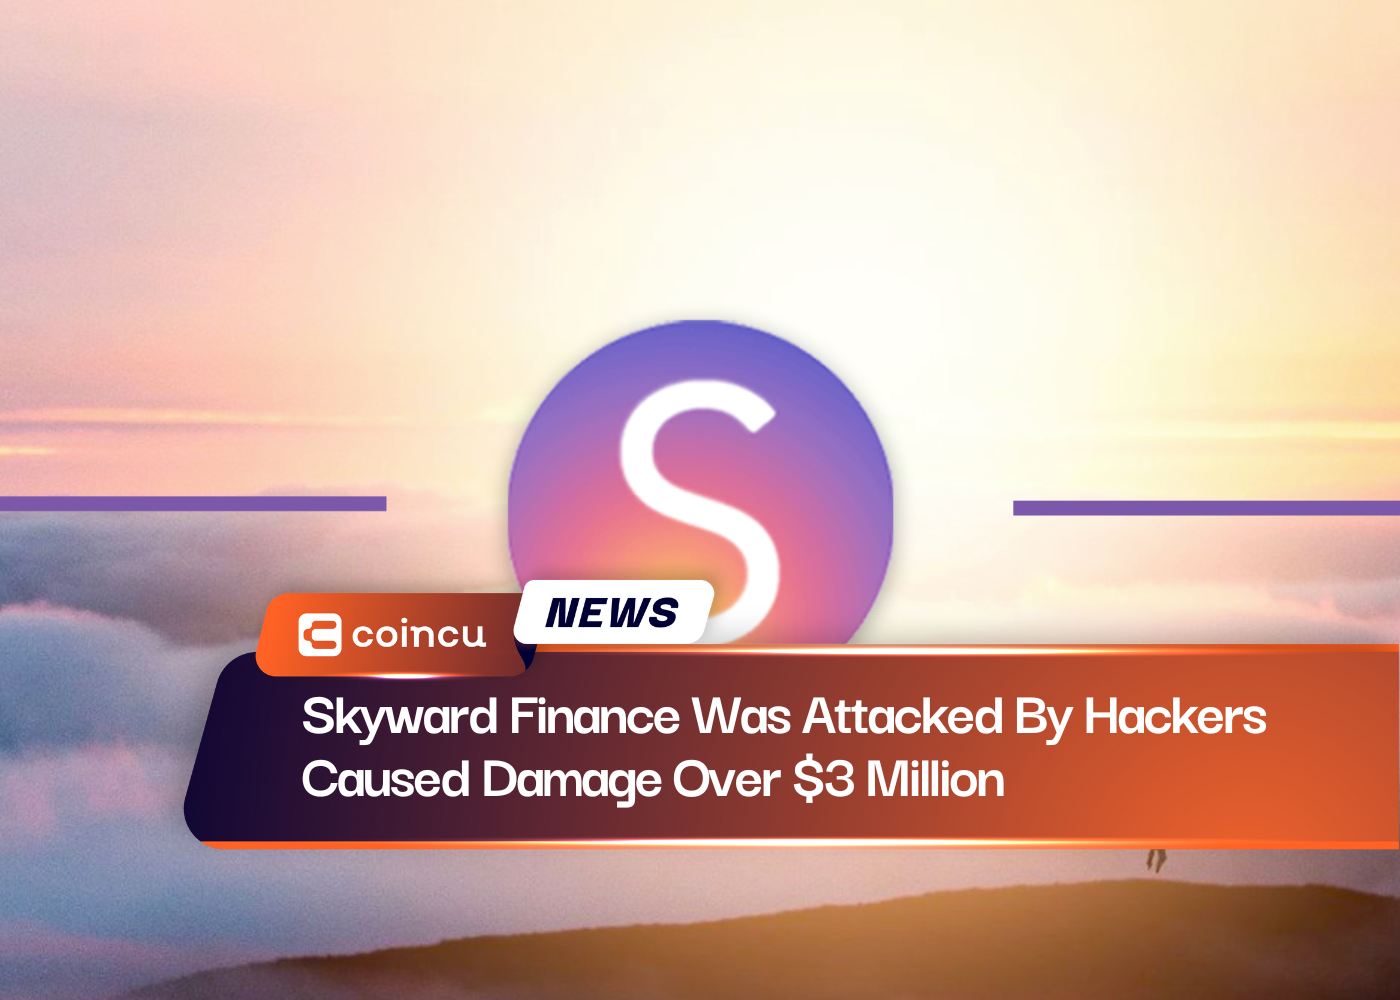 Skyward Finance Was Attacked By Hackers Caused Damage Over $3 Million